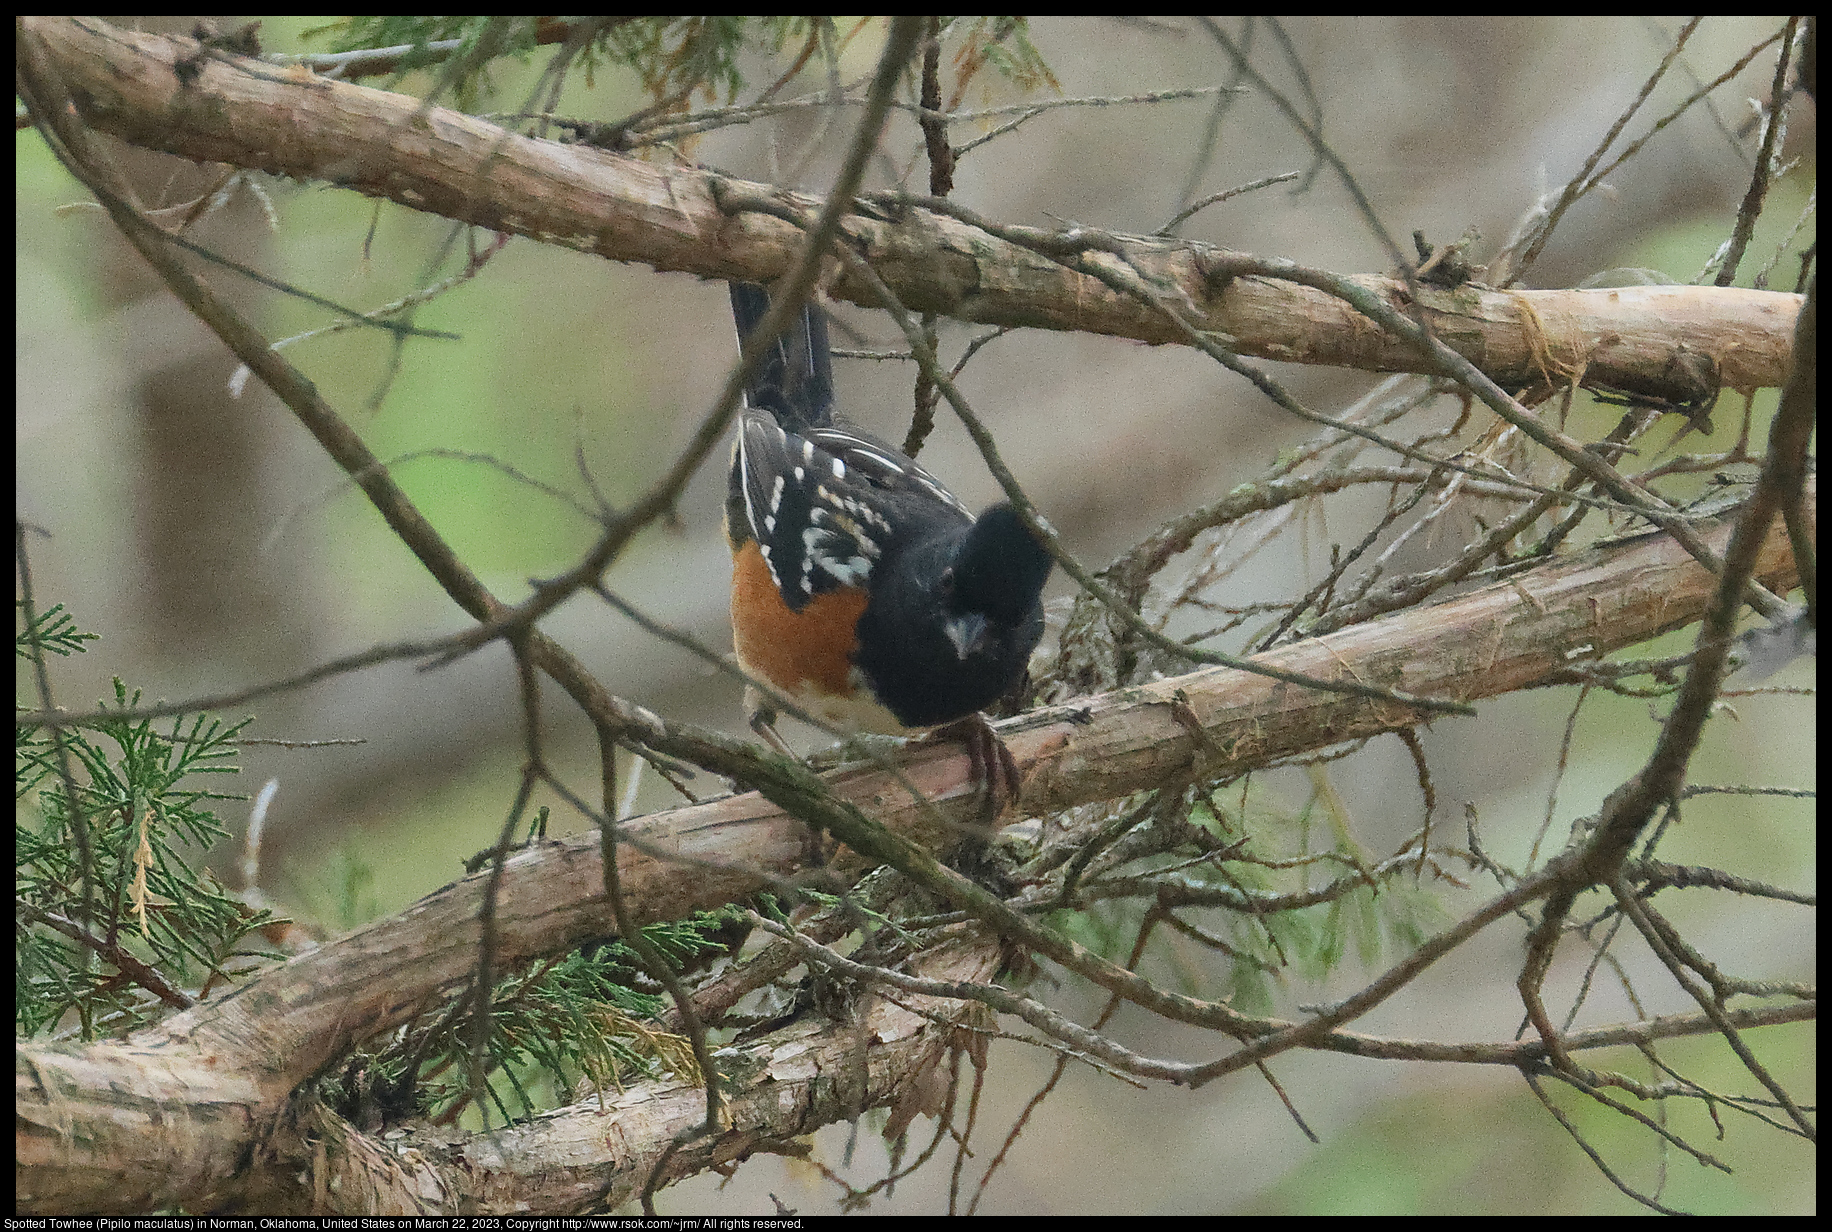 Spotted Towhee (Pipilo maculatus) in Norman, Oklahoma, United States on March 22, 2023